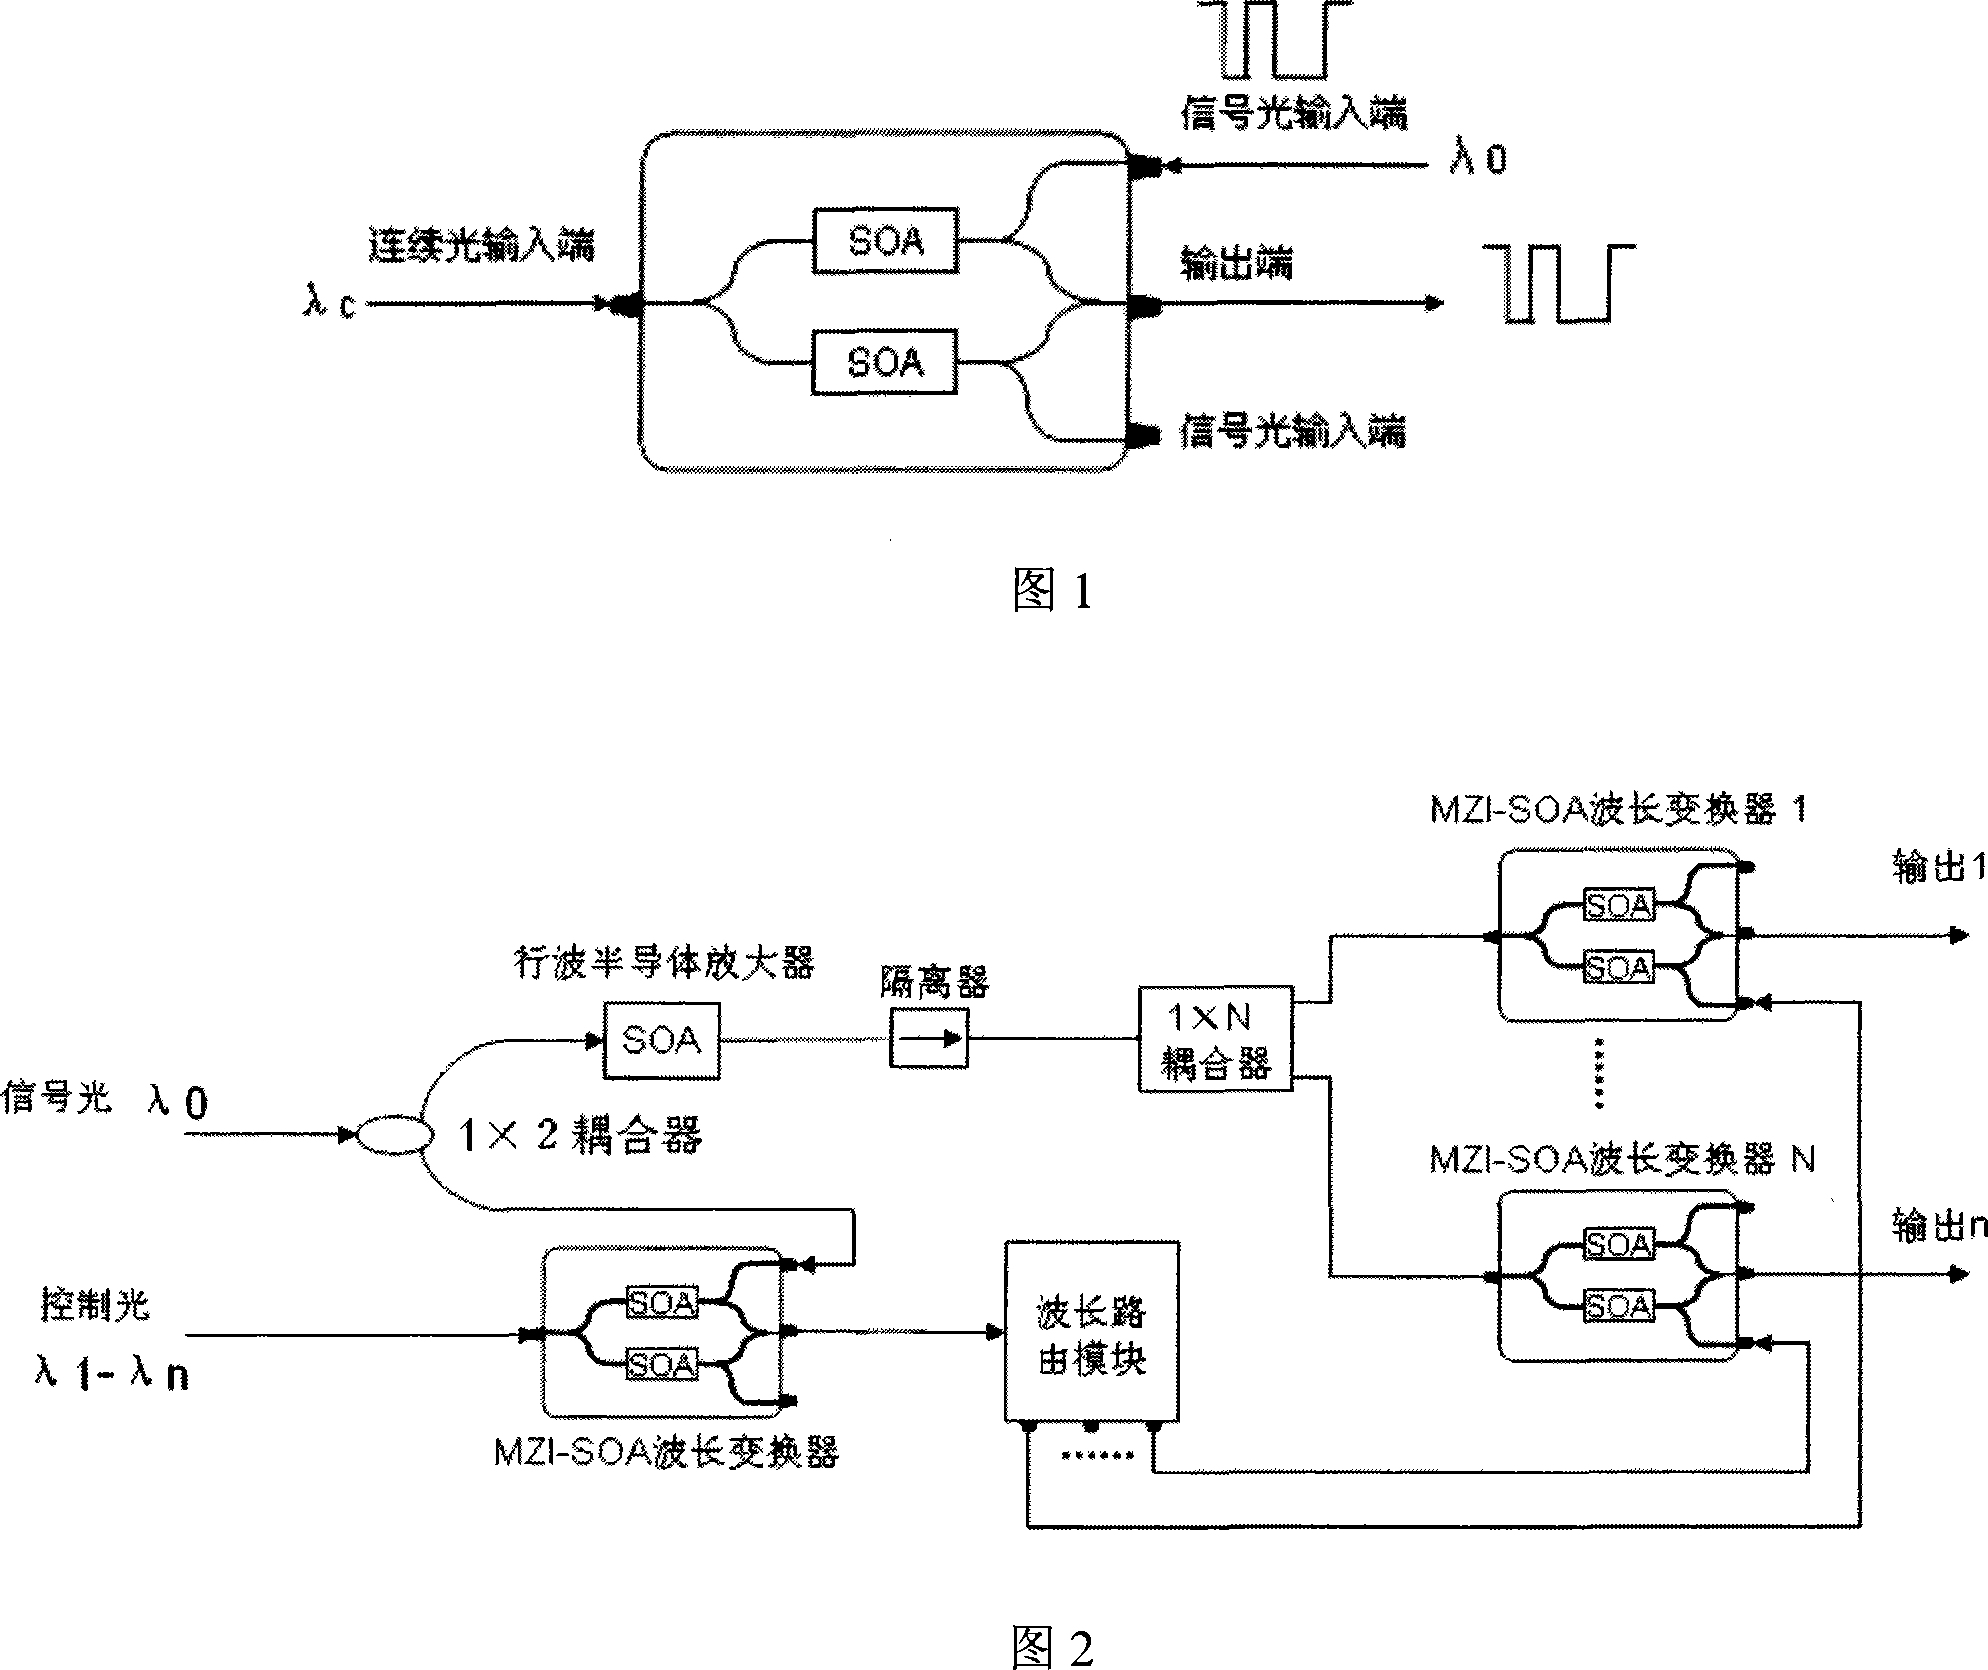 Full-light controlled optical switch system